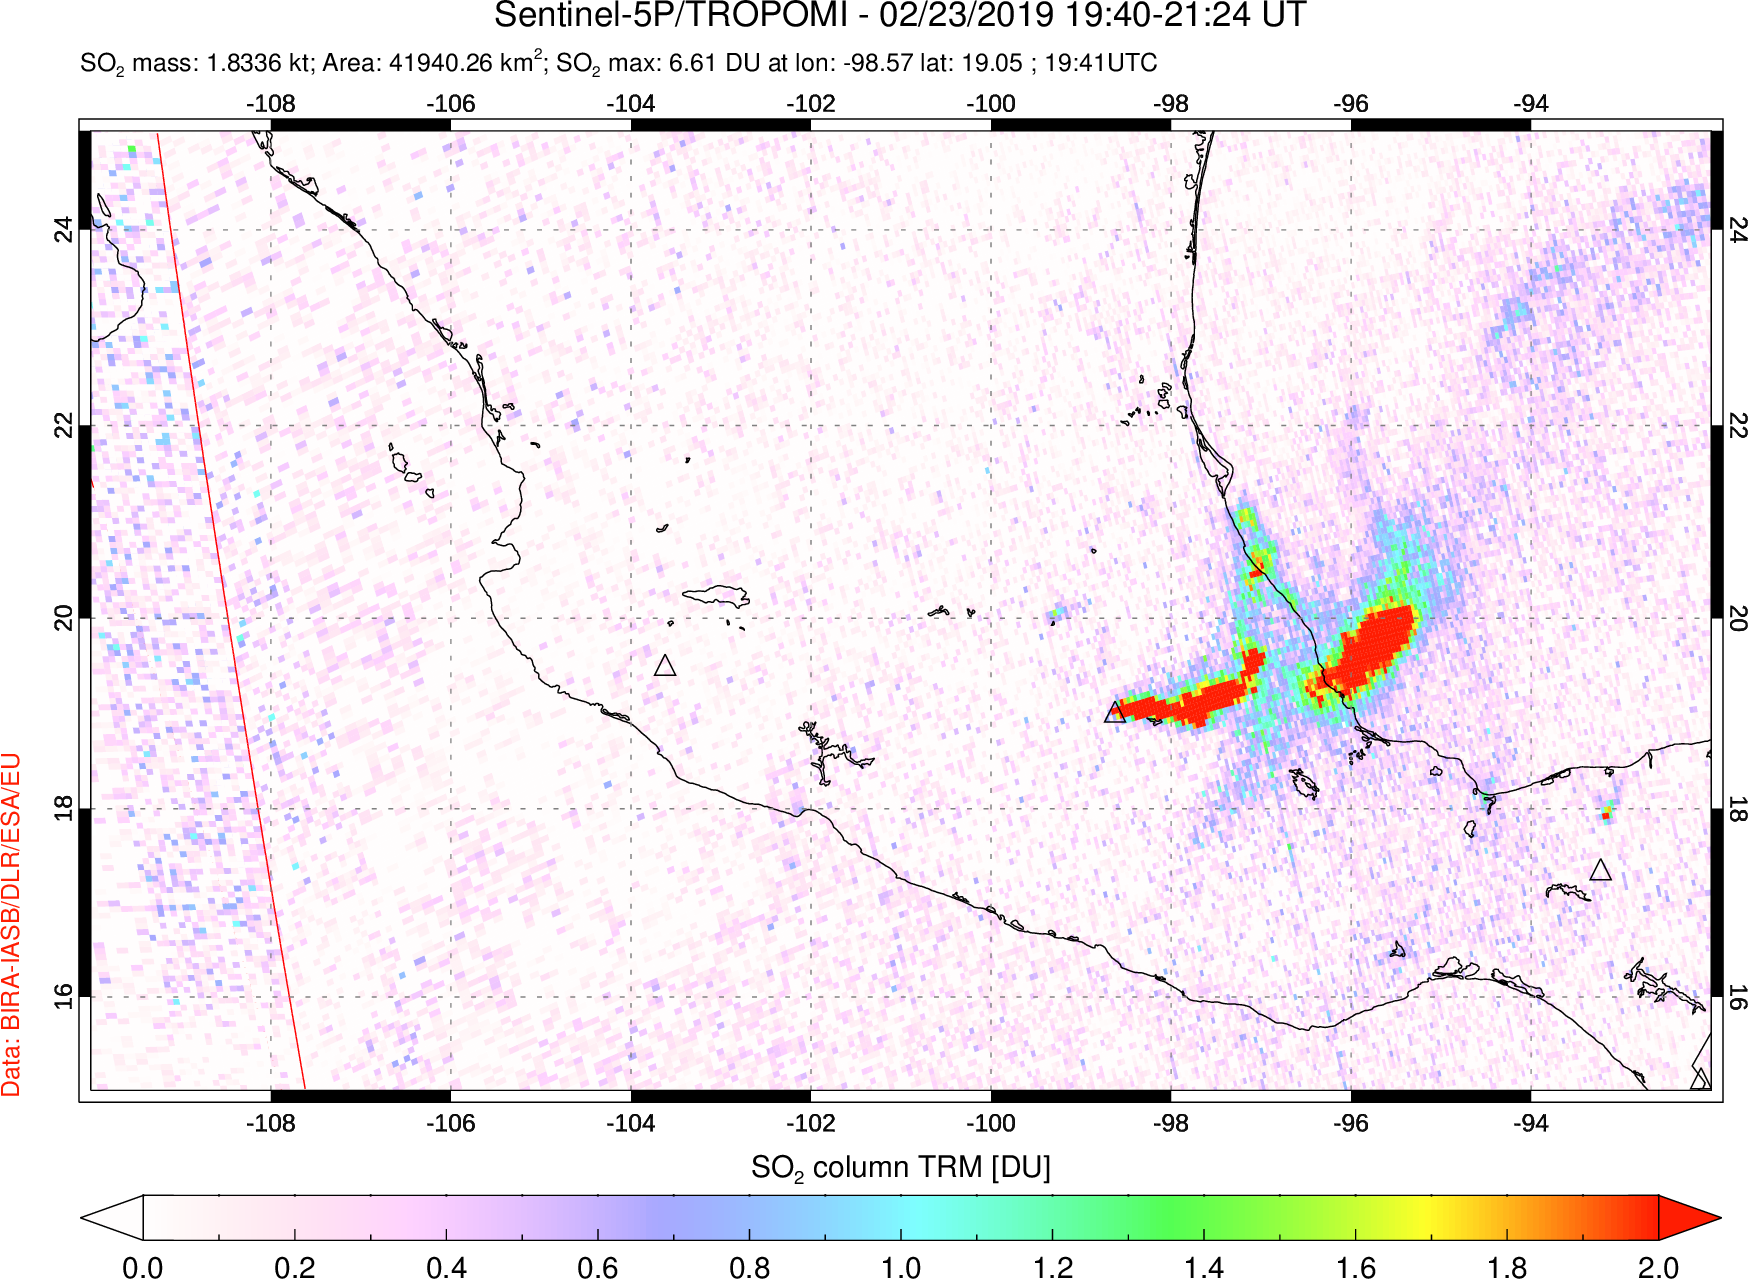 A sulfur dioxide image over Mexico on Feb 23, 2019.